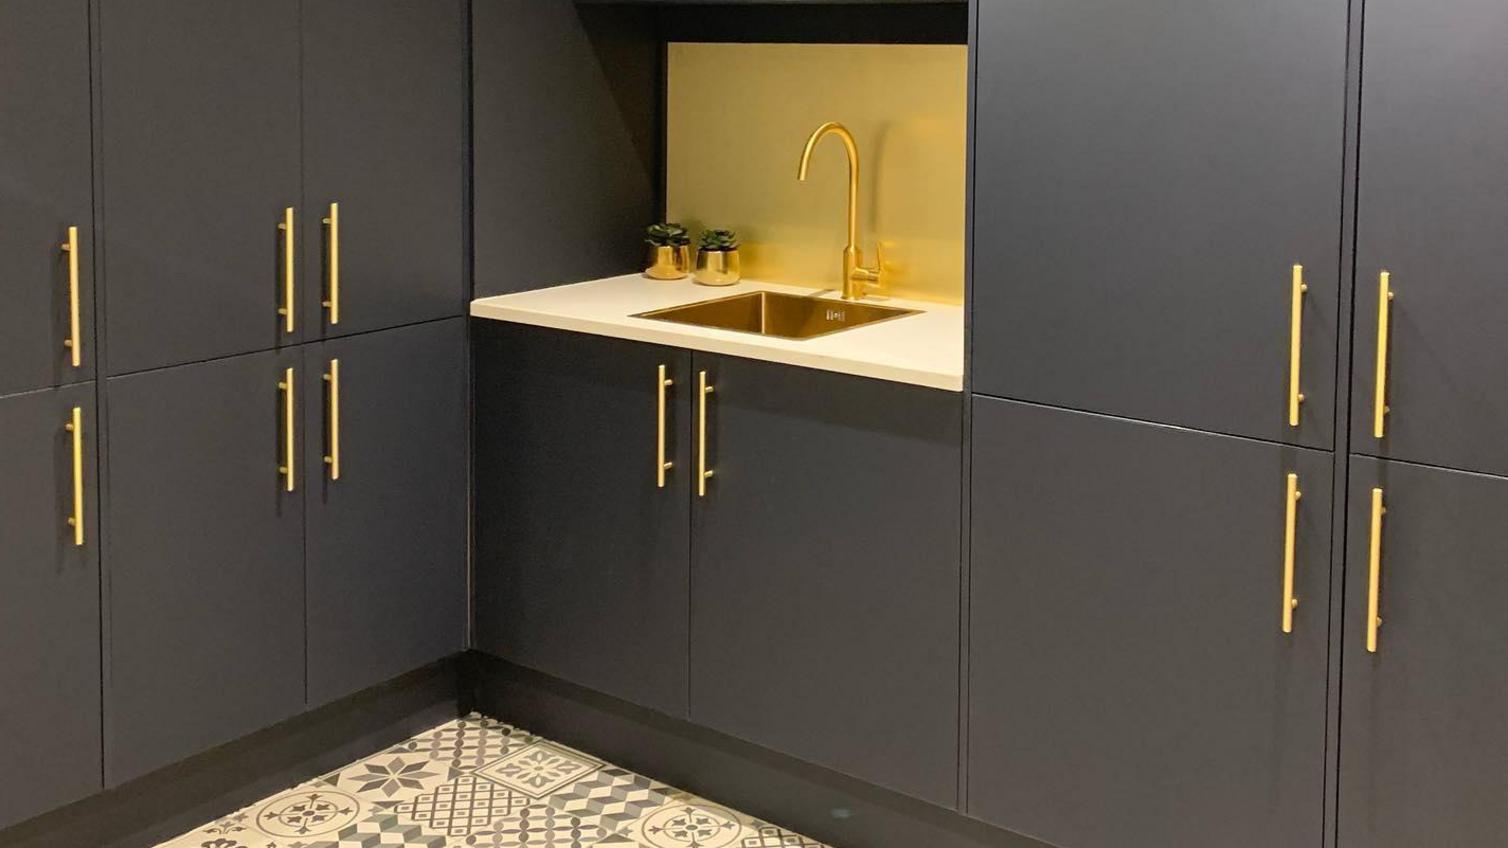 Utility room idea with banks of charcoal slab cupboards, including tower units, gold bar handles and a gold tap and sink.